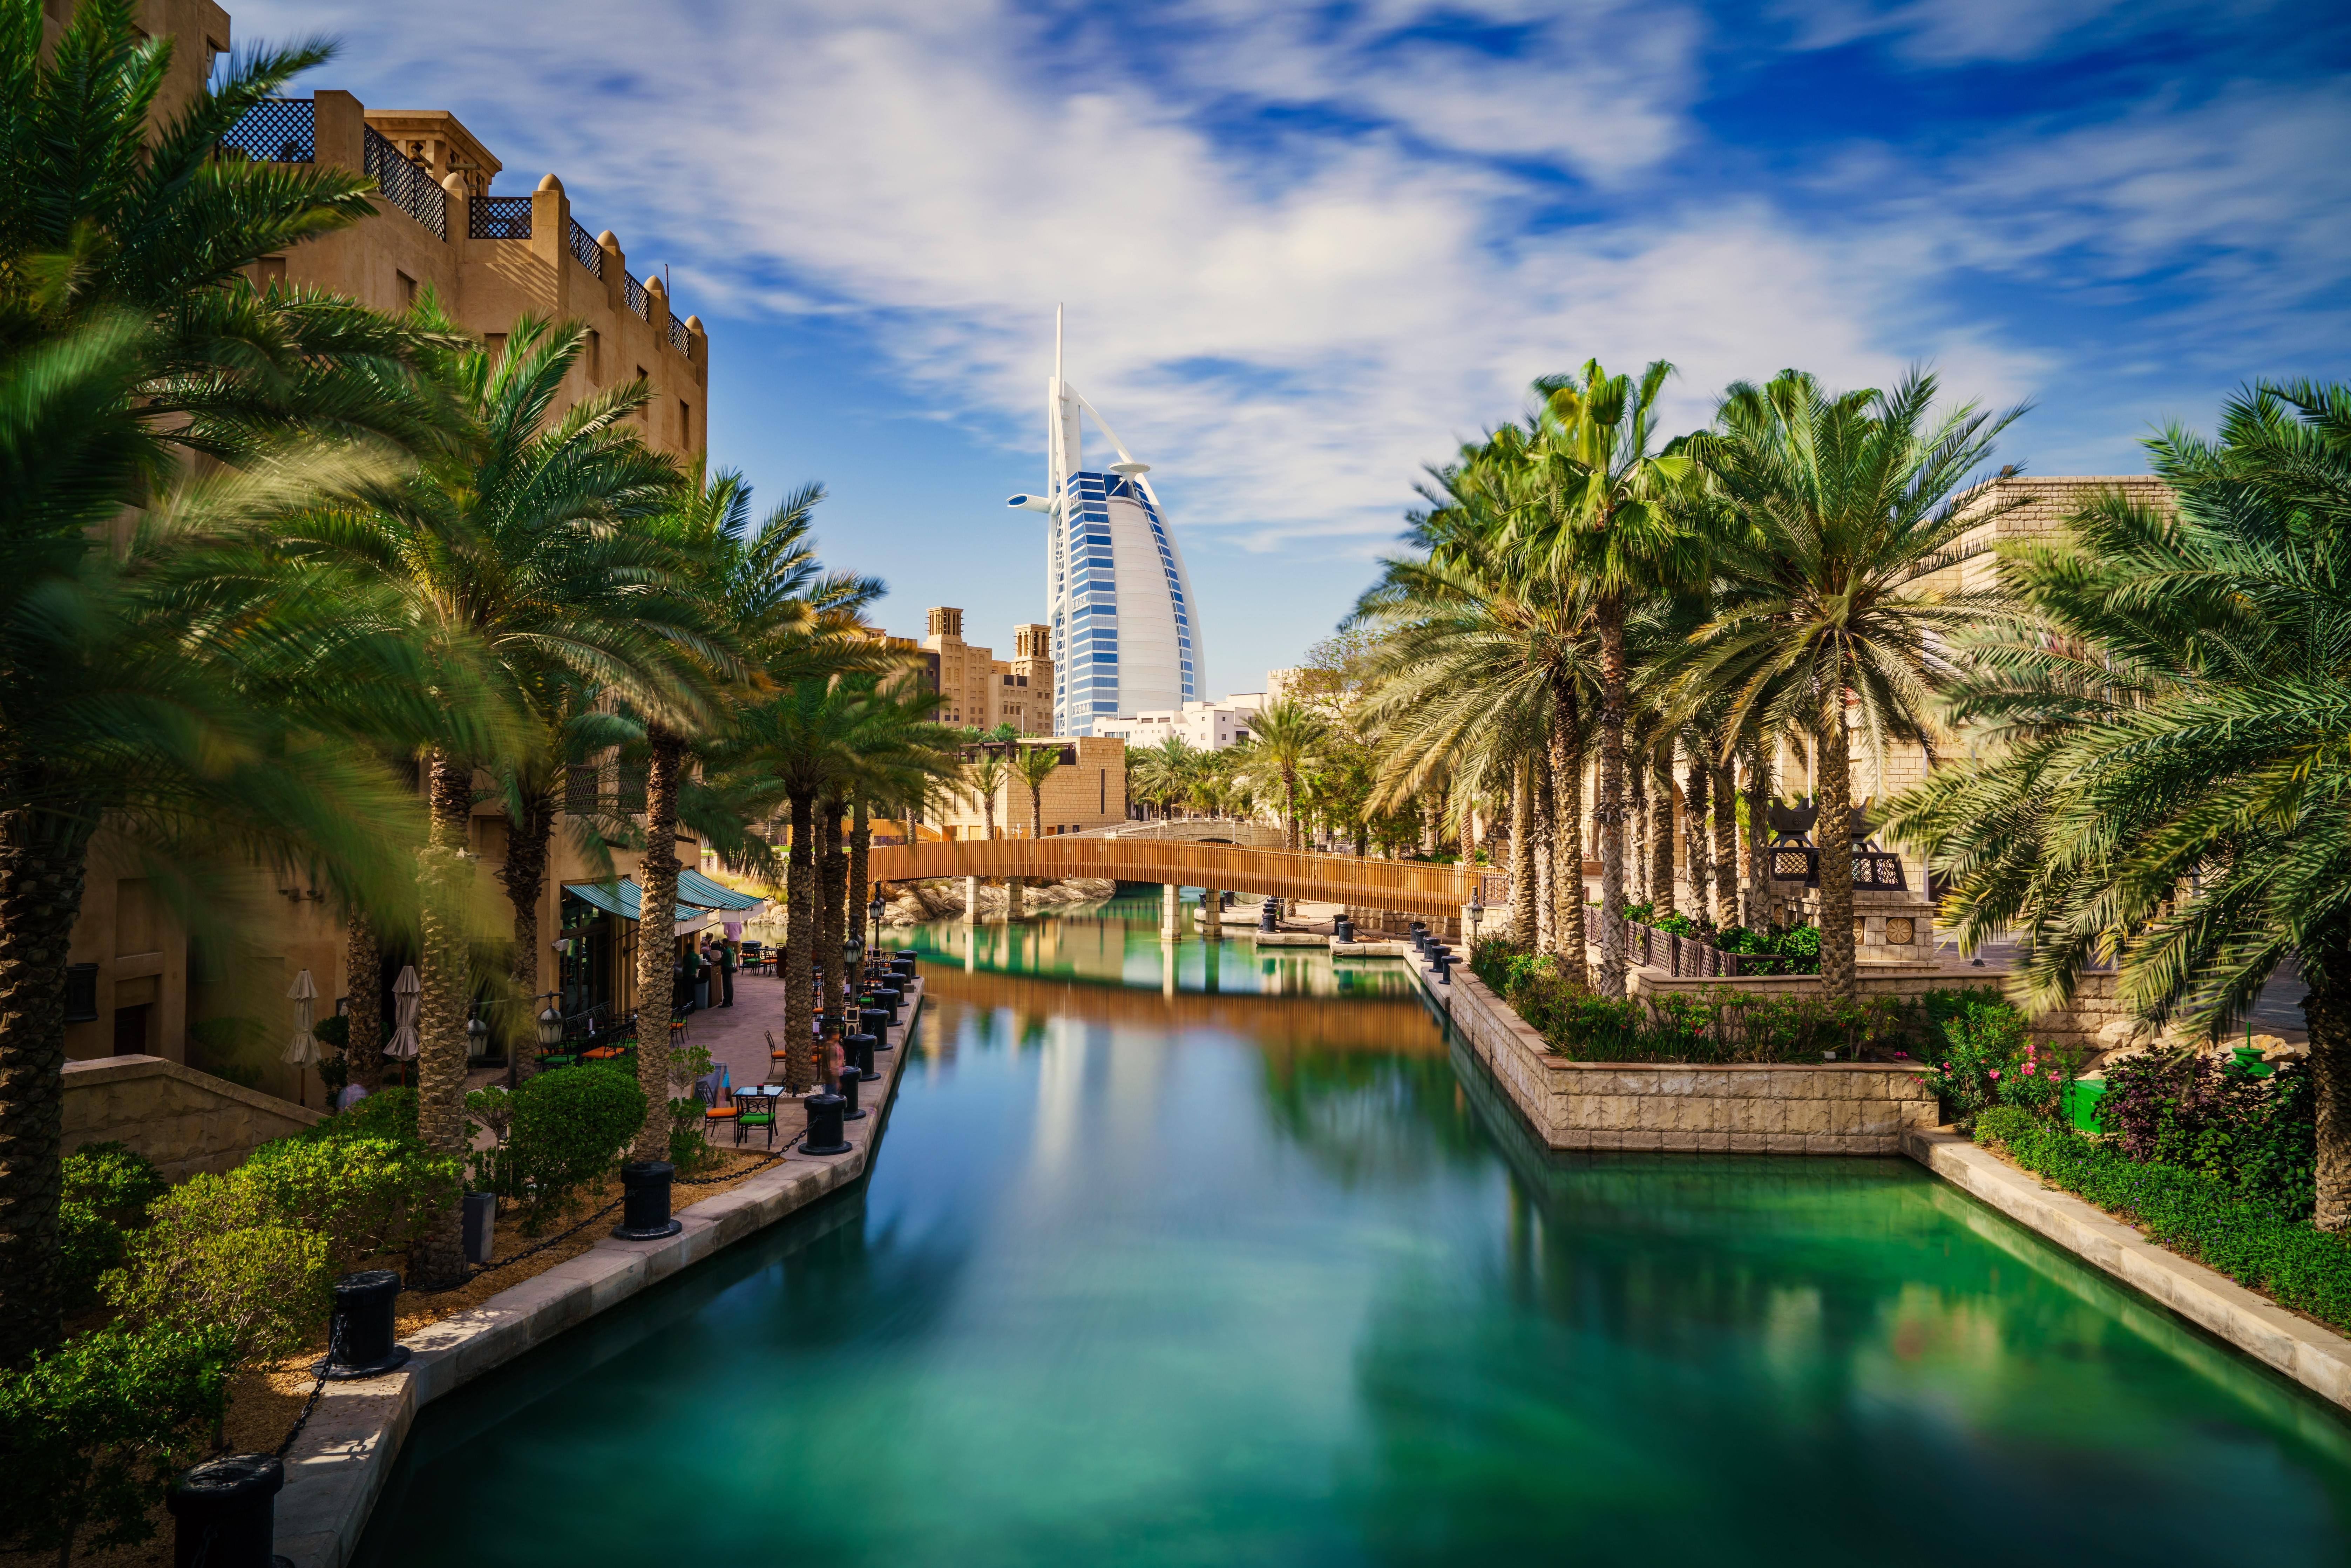 Panoramic view of water channel at Dubai's old town souk